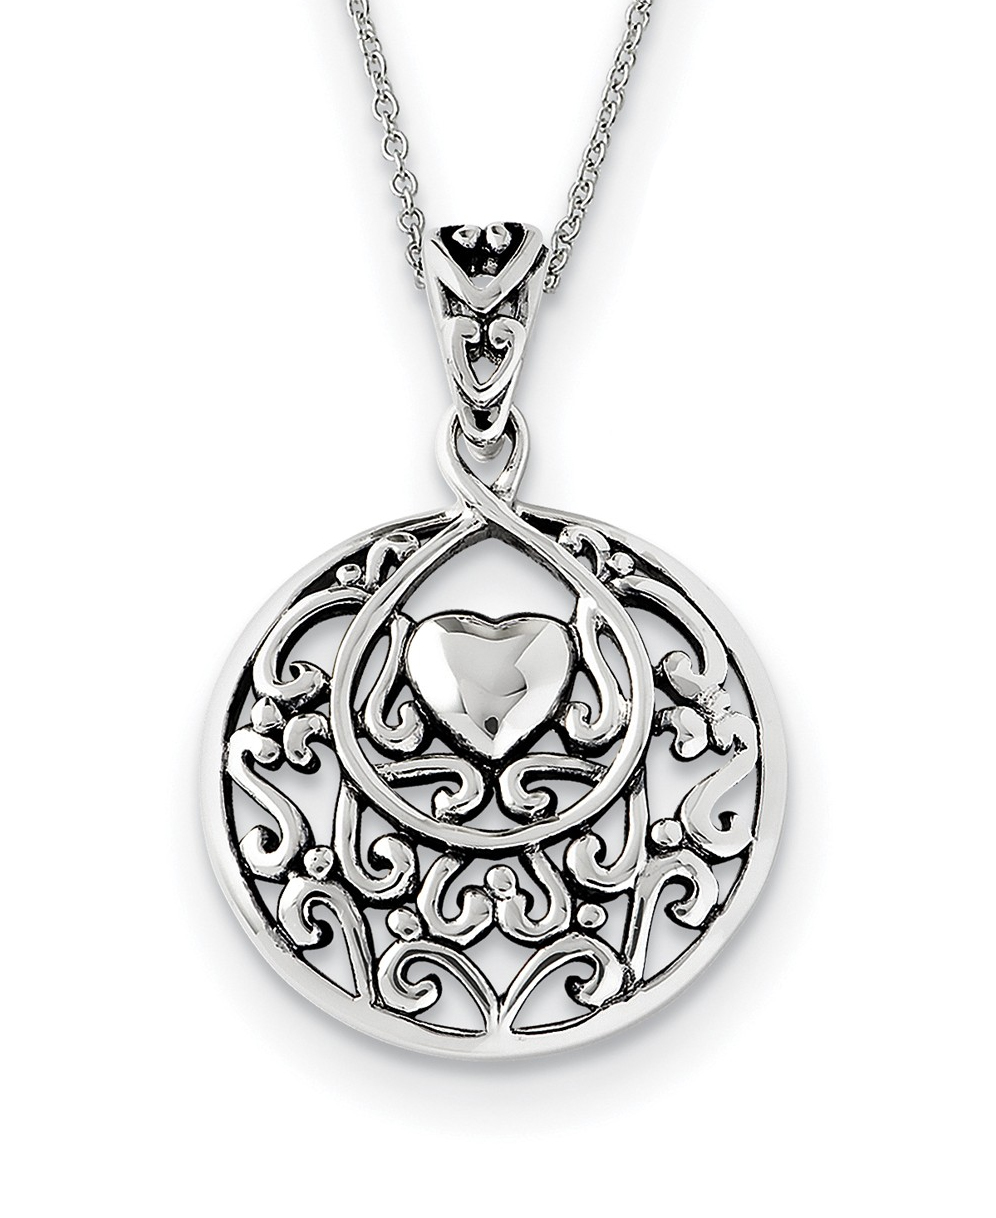   Antiqued Sterling Silver, 'I Choose You Pendant Heart' Rhodium-Plated Pendant Necklace, 18